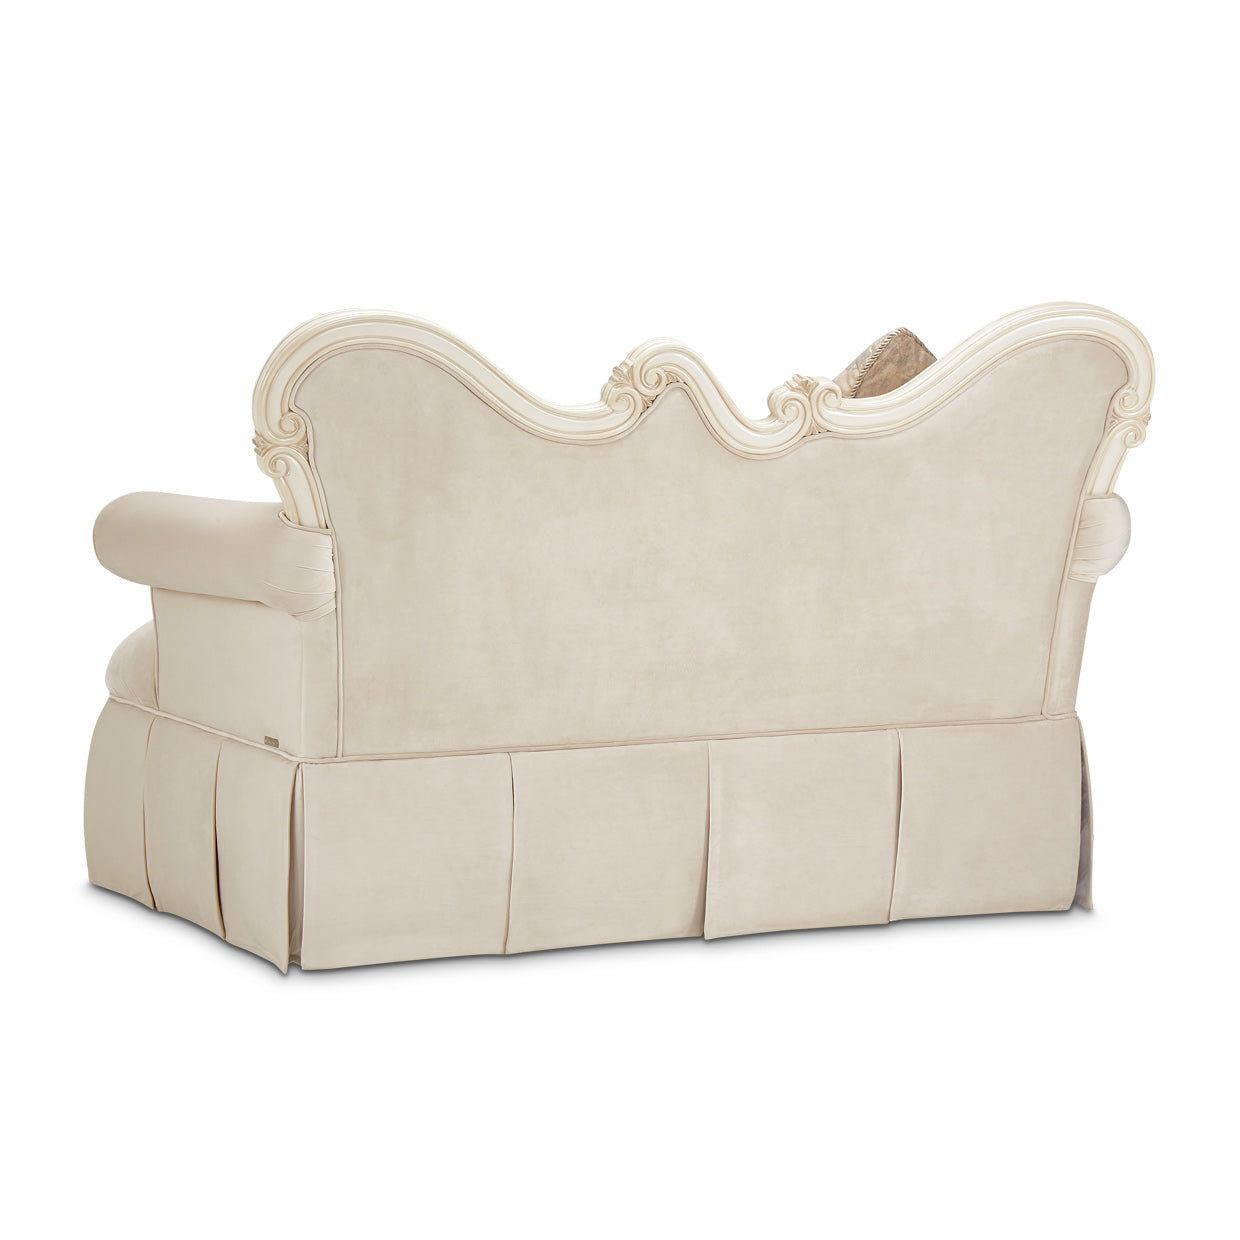 LAVELLE-CLASSIC PEARL Lavelle Settee Ivory Classic Pearl - Dream art Gallery